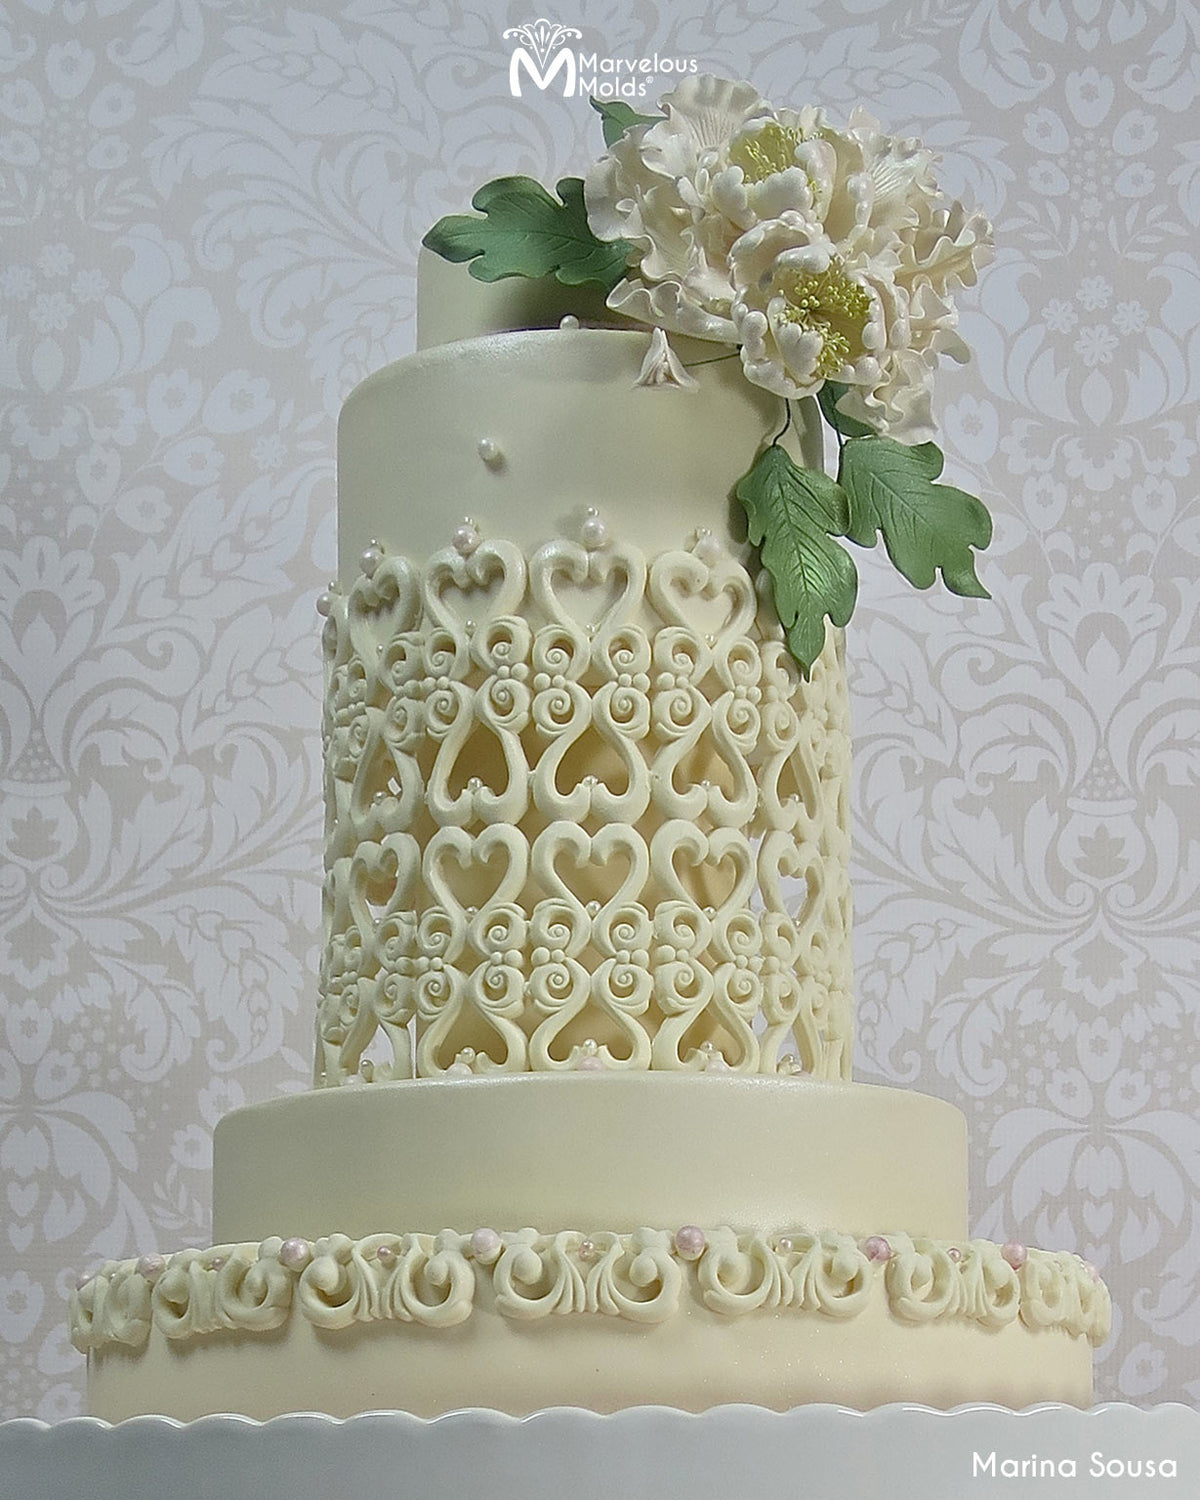 White Vintage Wedding Cake Decorate Using the Marvelous Molds Bella Scroll Silicone Mold